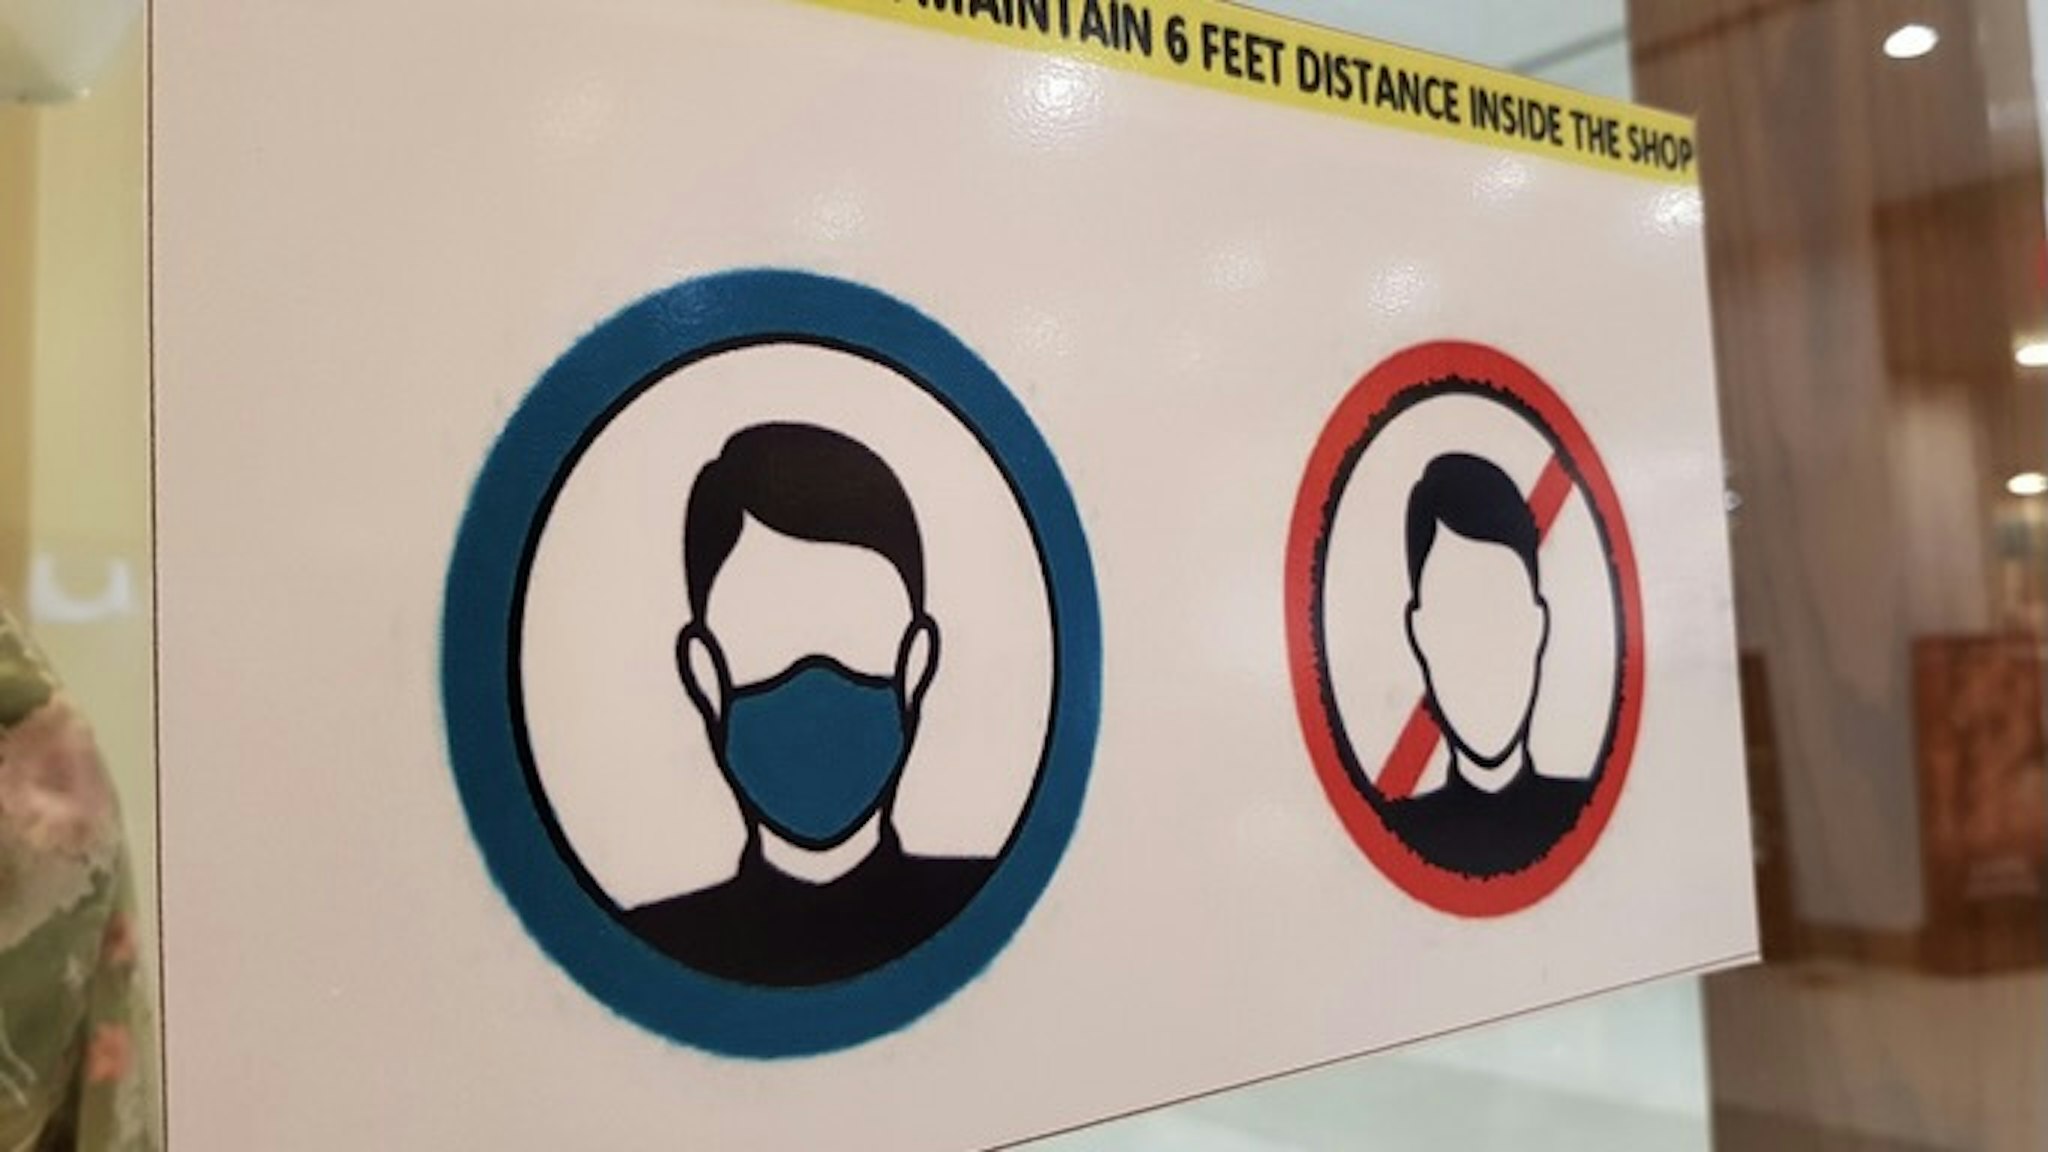 Safety or warning signs for wearing surgical face mask before entering in shops during Corona Virus (Covid-19) pandemic. - stock photo Corona Virus precautionary and safety signs on and near shops in the markets. Amir Mukhtar via Getty Images